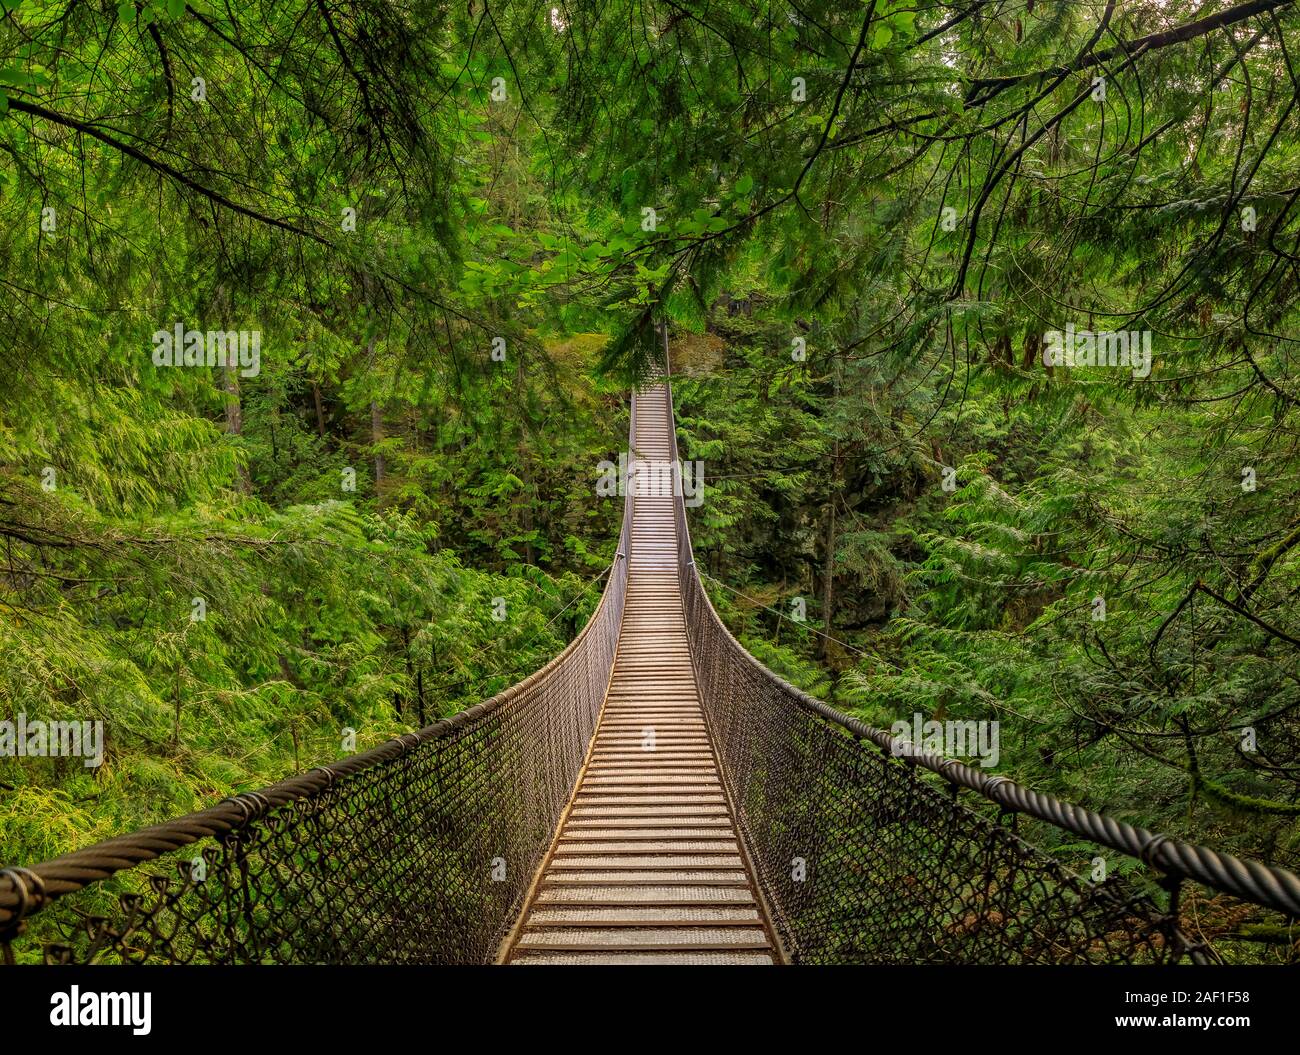 Old suspension bridge above a river, among pine trees growing on a